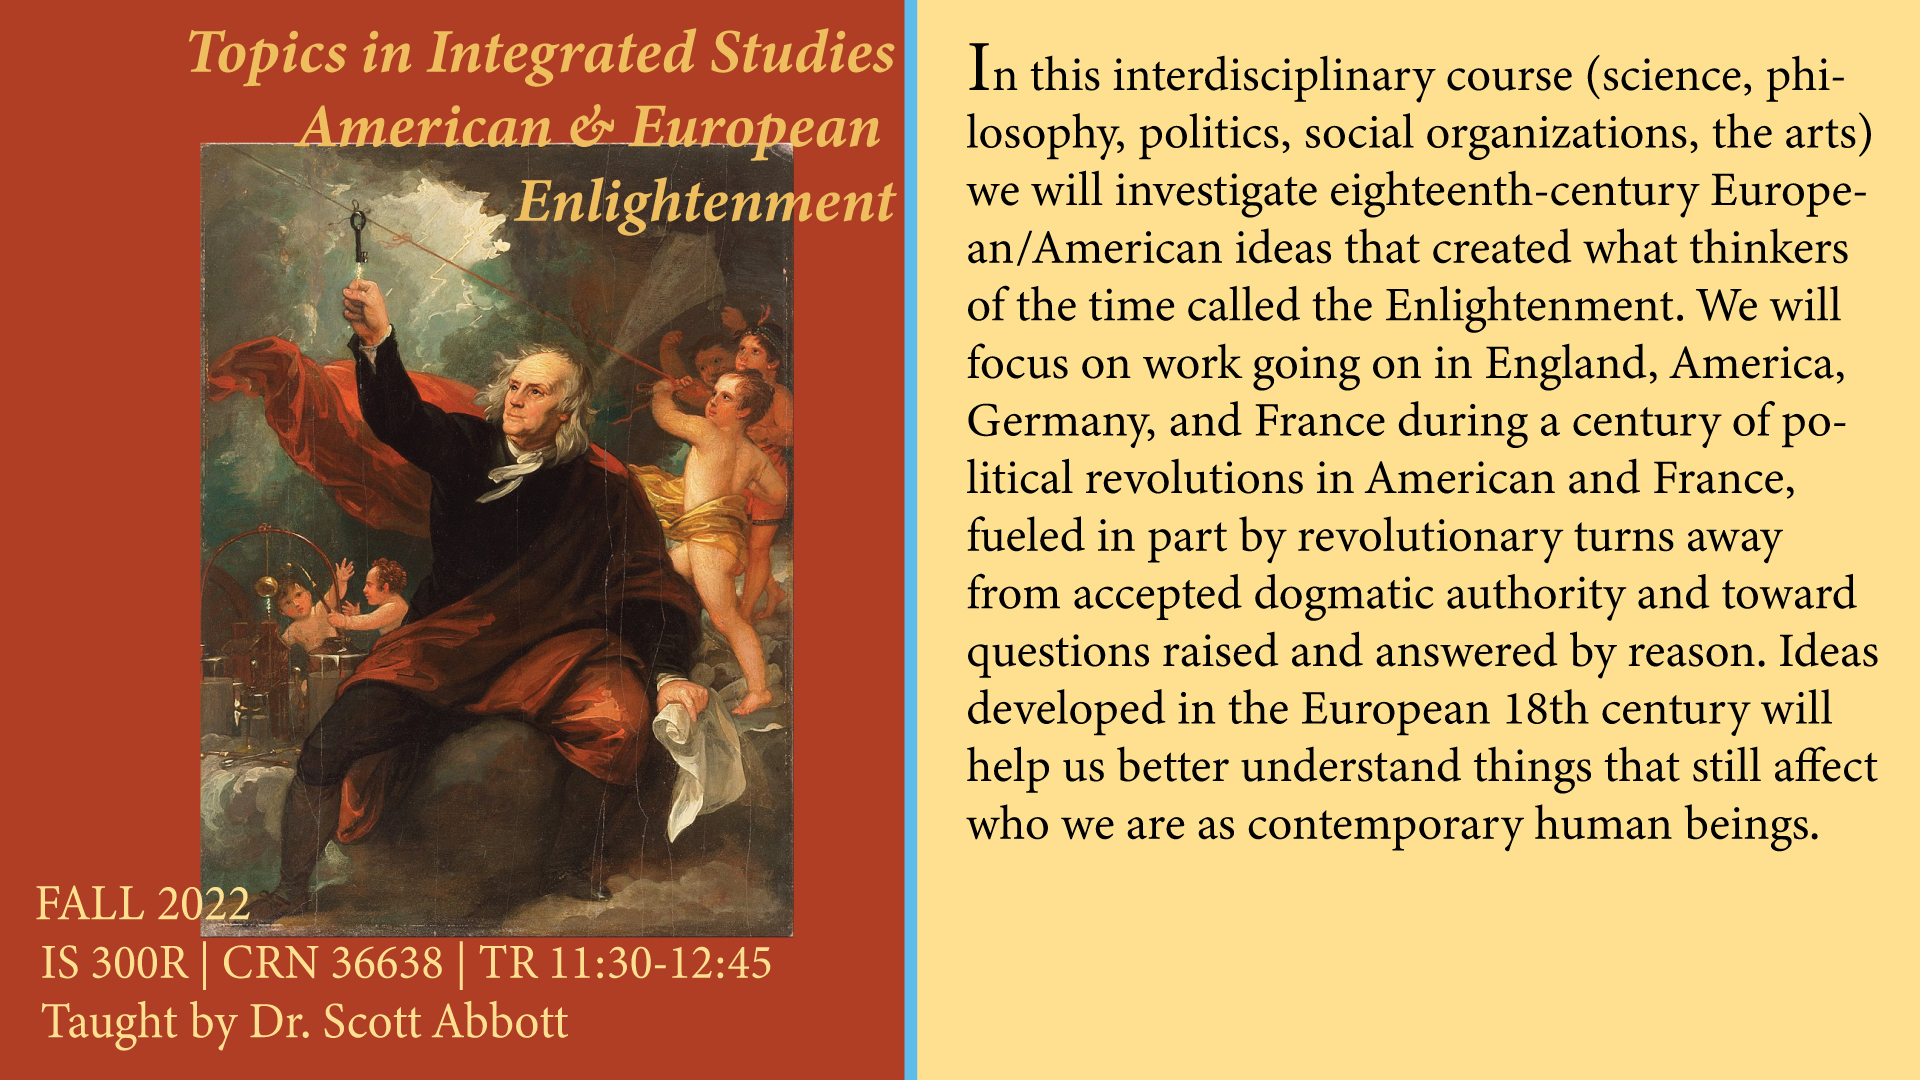 In this interdisciplinary course we will investigate eighteenth century European/American ideas that created what thinkers of the time called Enlightenment. We will focus on work going on in England, America, Germany, and France during a century of political revolutions in America and France, fueled in part by revolutionary turs away from accepted dogmatic authority and toward questions raised and answered by reason. Ideas developed in the European 18th century will help us better understand things that still affect who we are as  contemporary human beings.